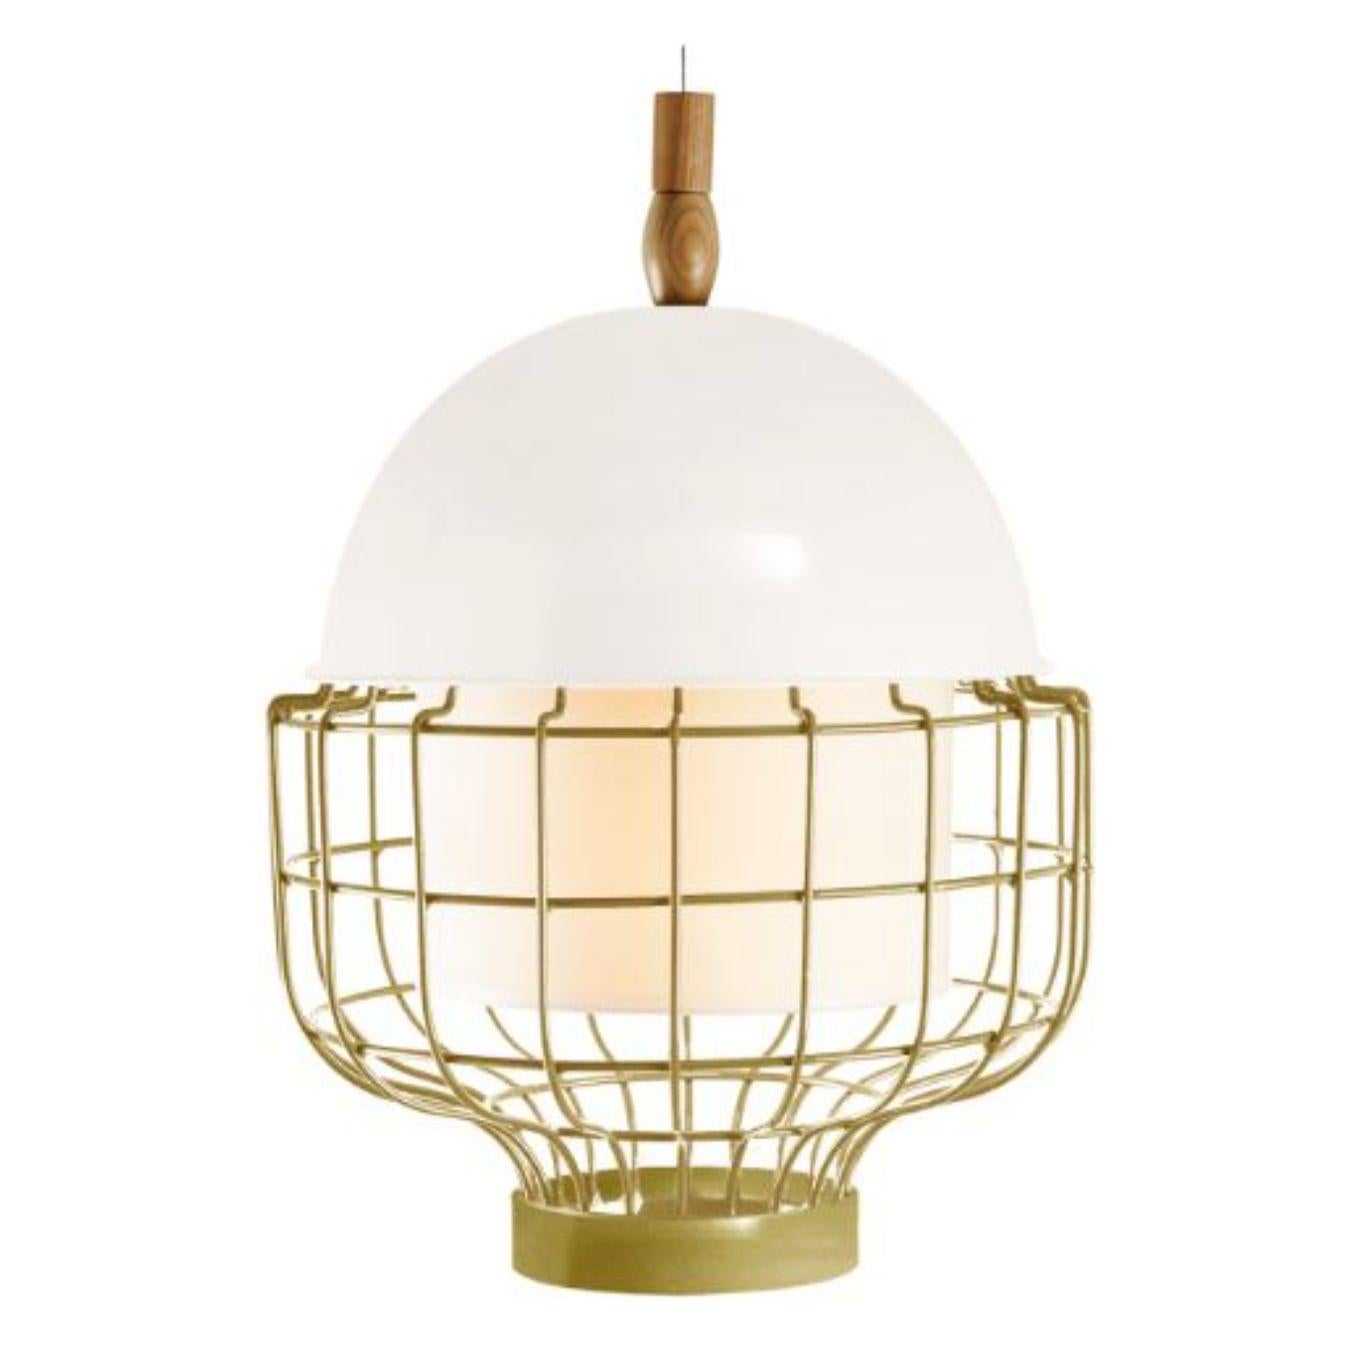 Brass Copper Magnolia III Suspension Lamp with Brass Ring by Dooq For Sale 4